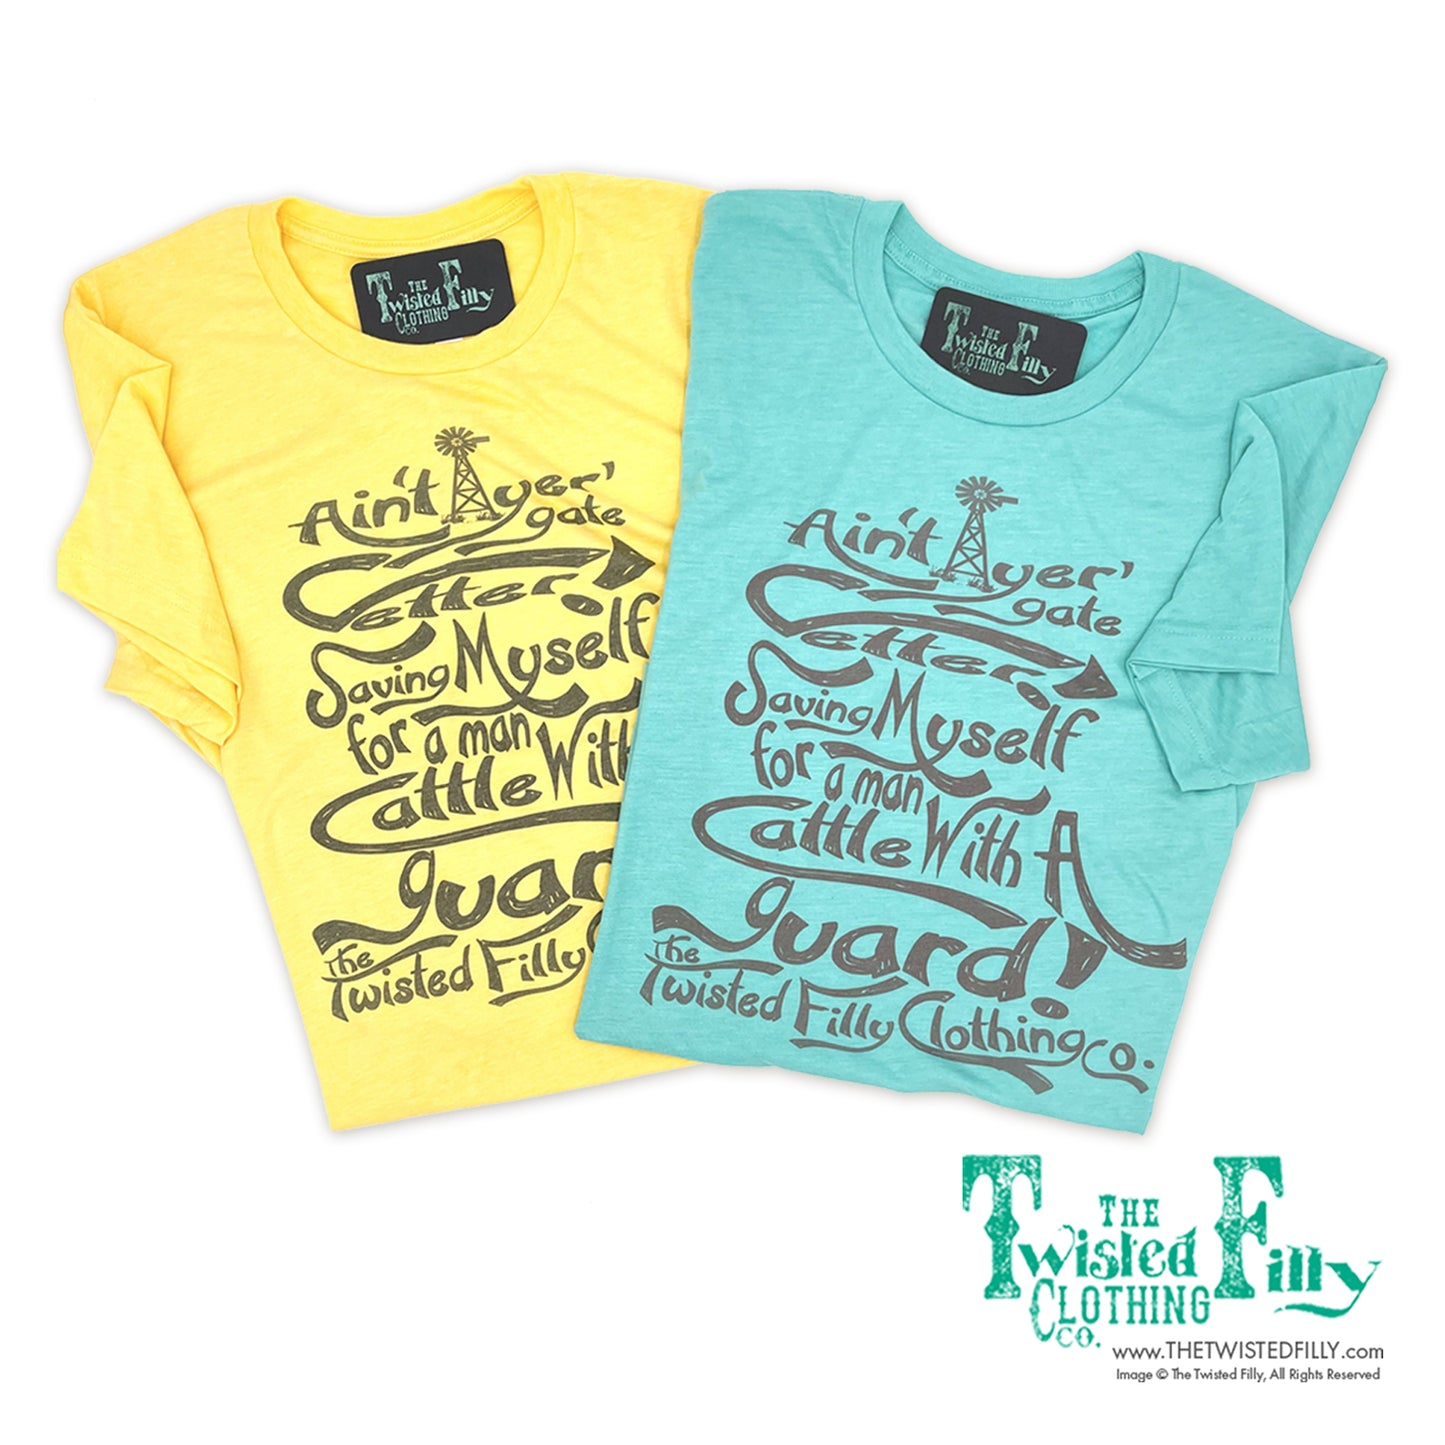 Ain't Yer Gate Getter - S/S Womens Crew Neck Tee - Assorted Colors